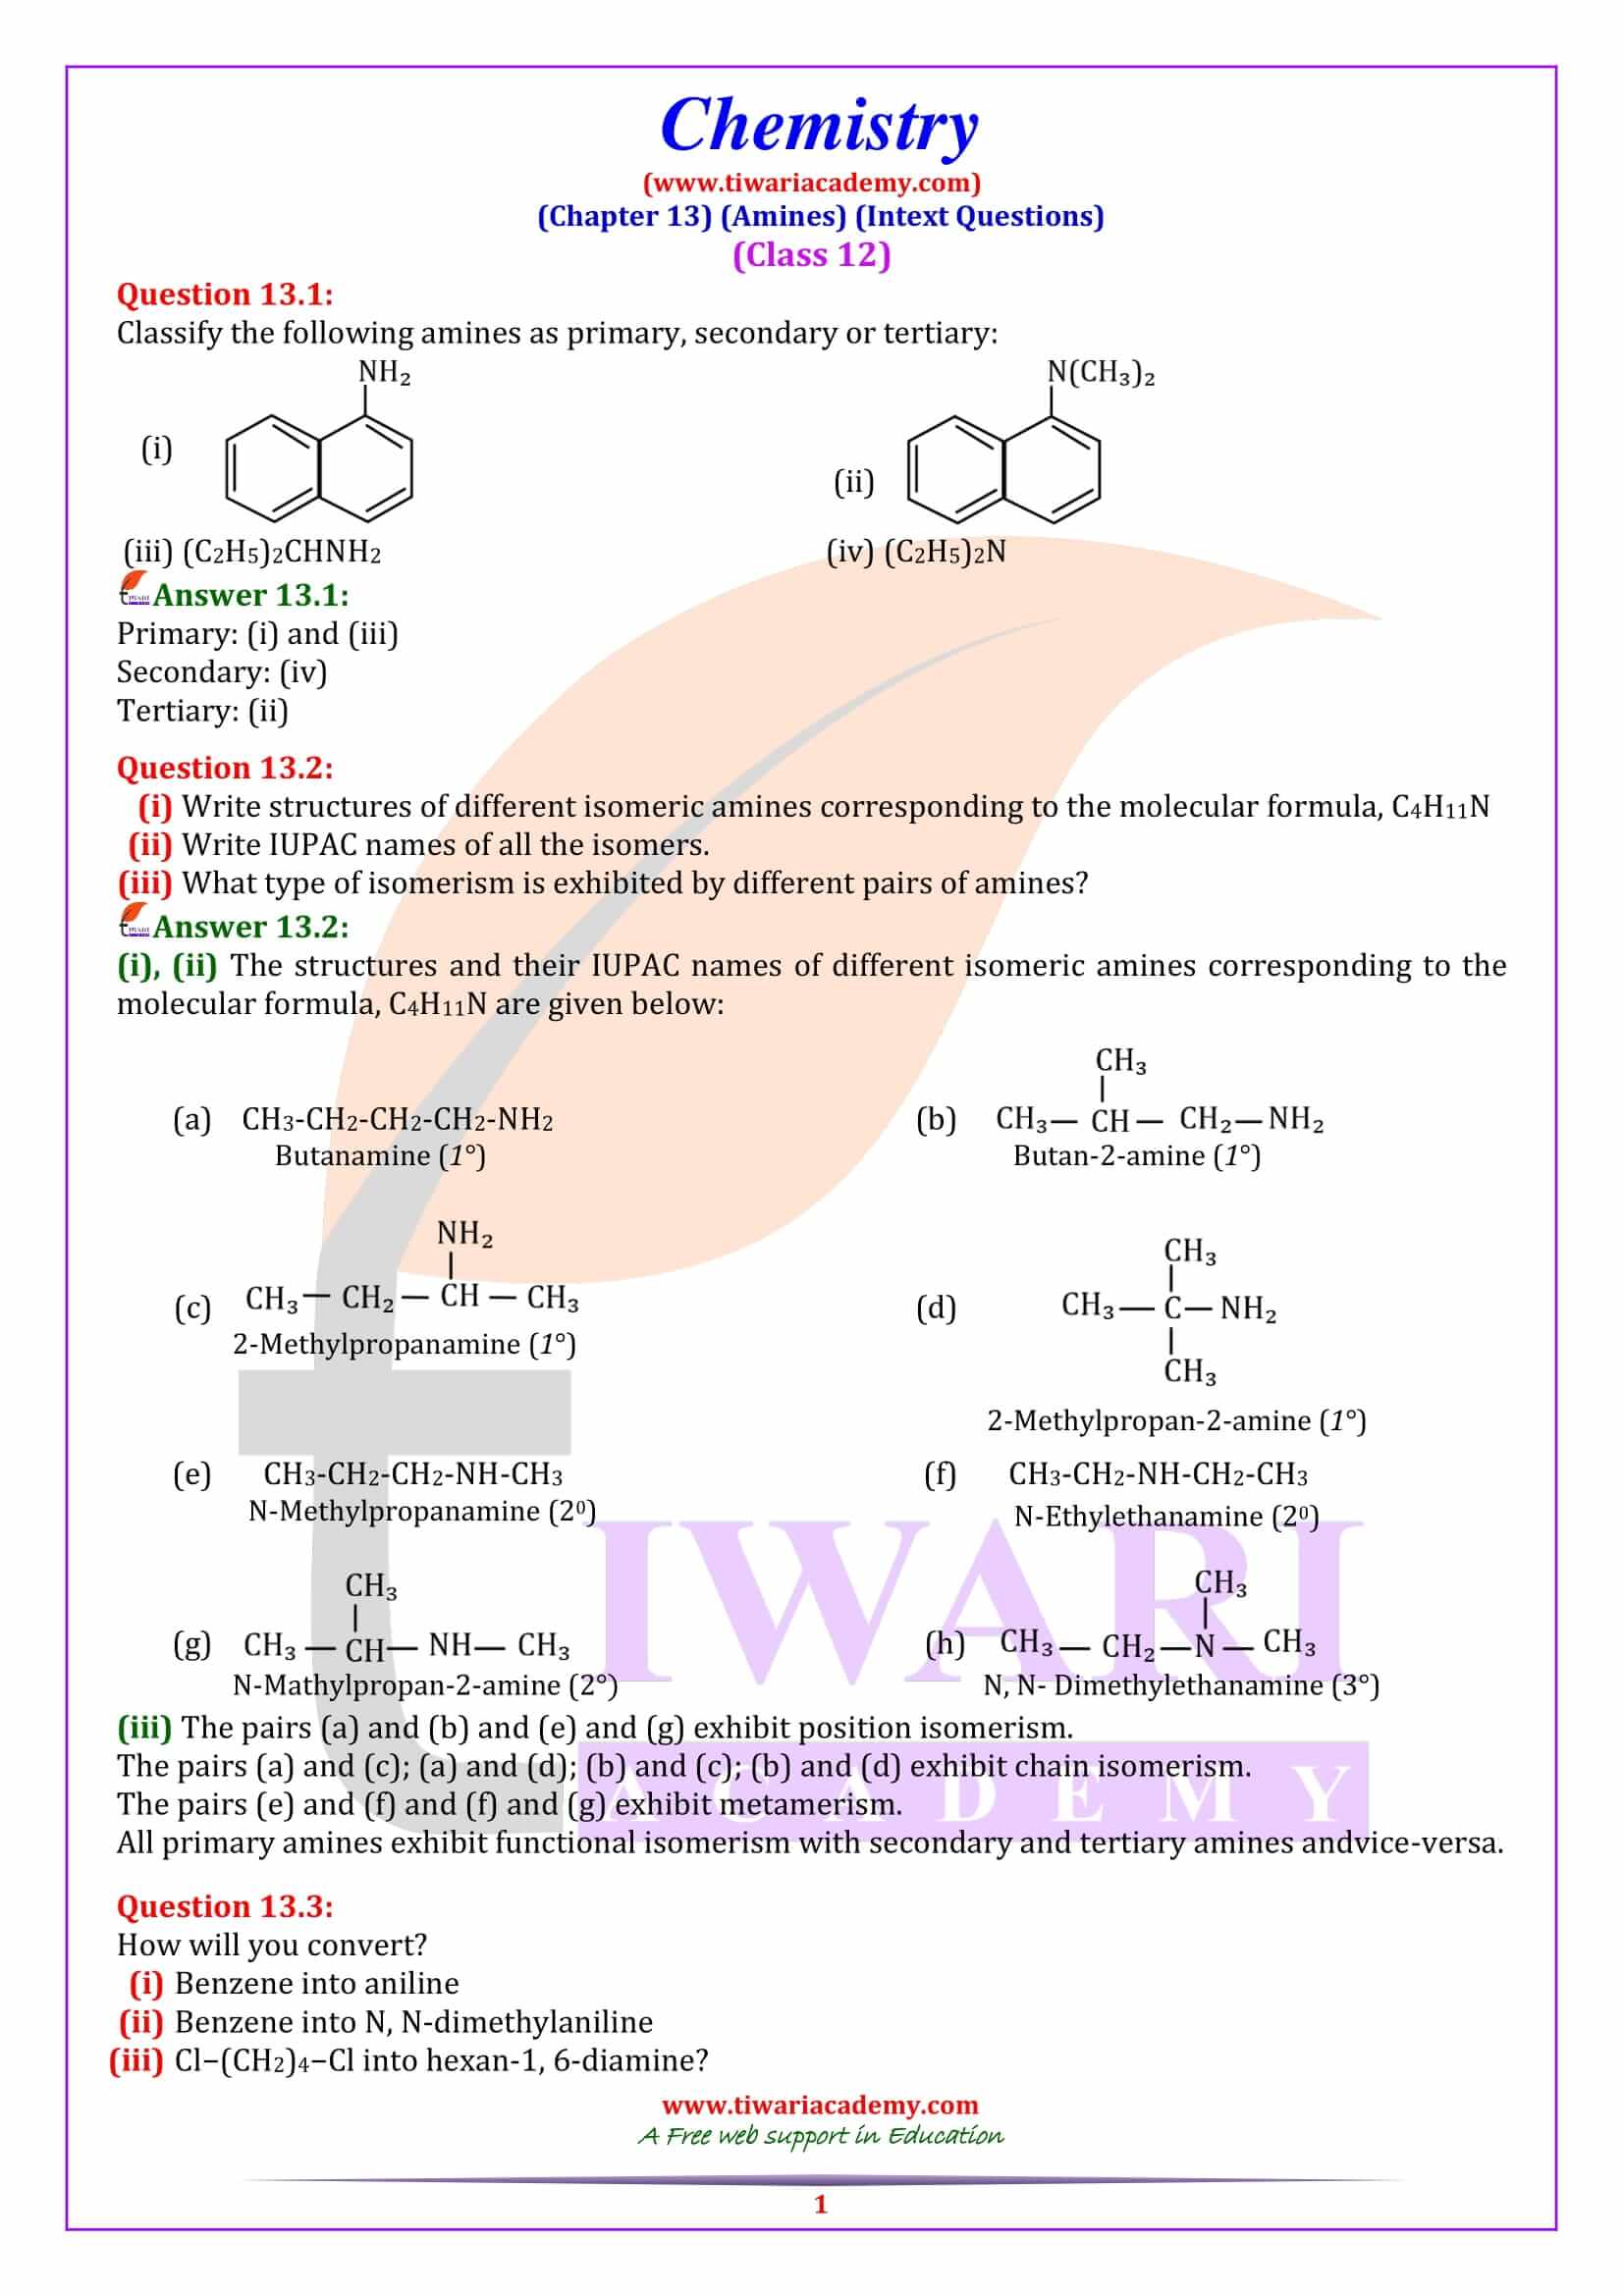 Class 12 Chemistry Chapter 13 Intext Questions